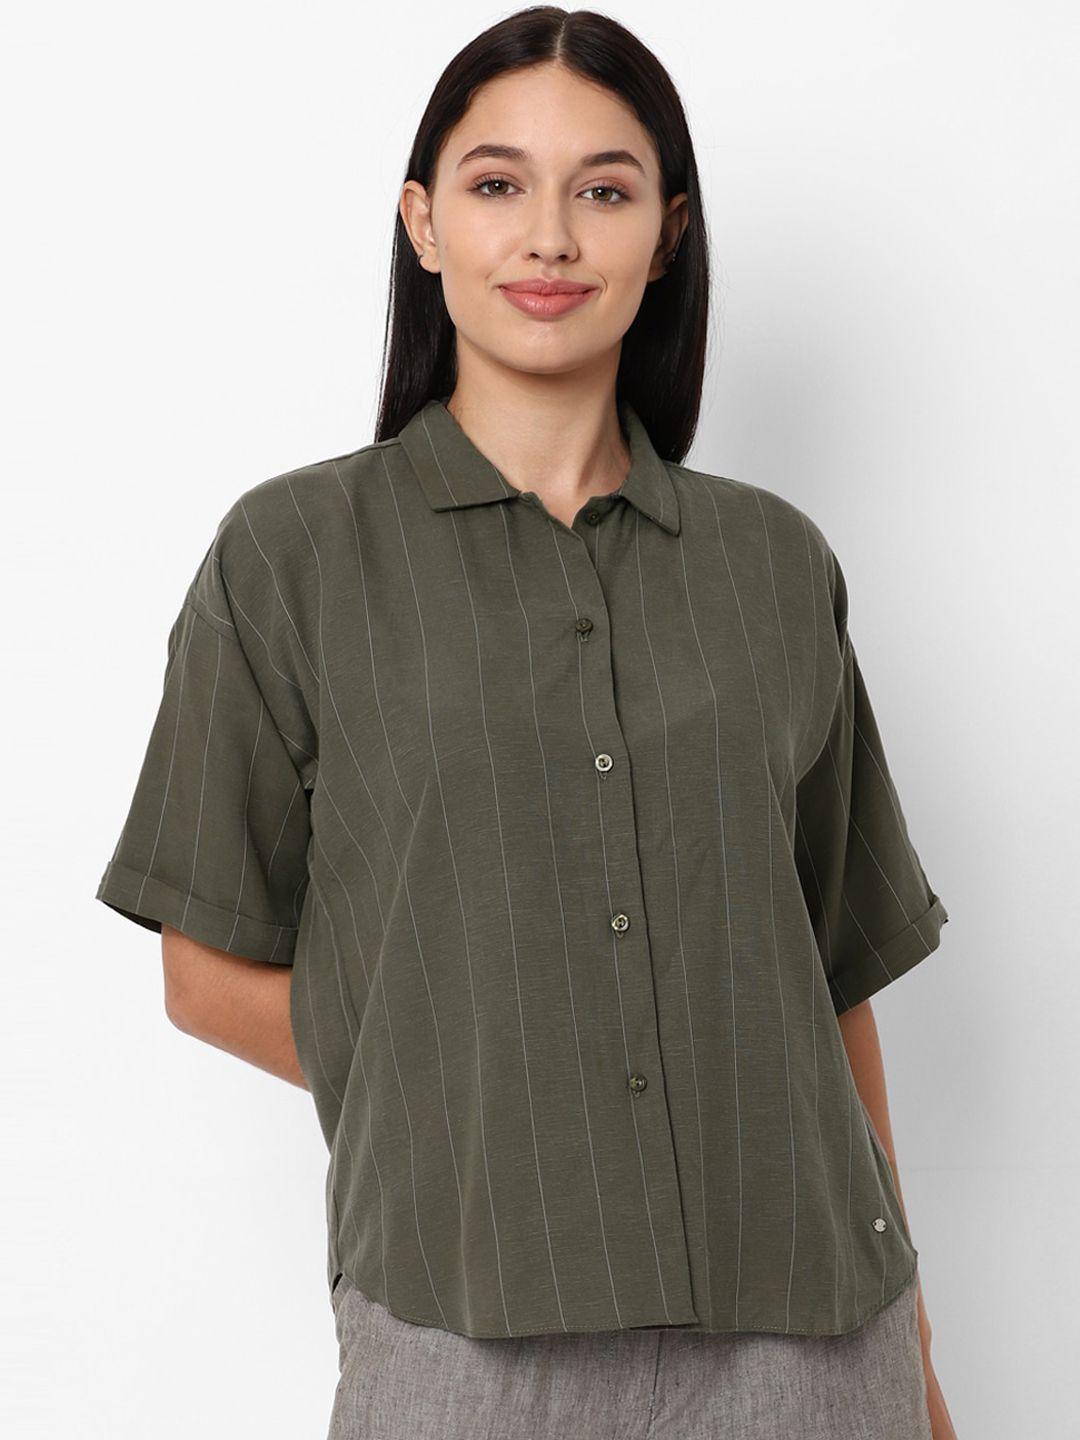 Allen Solly Woman Women Olive Green Opaque Striped Casual Shirt